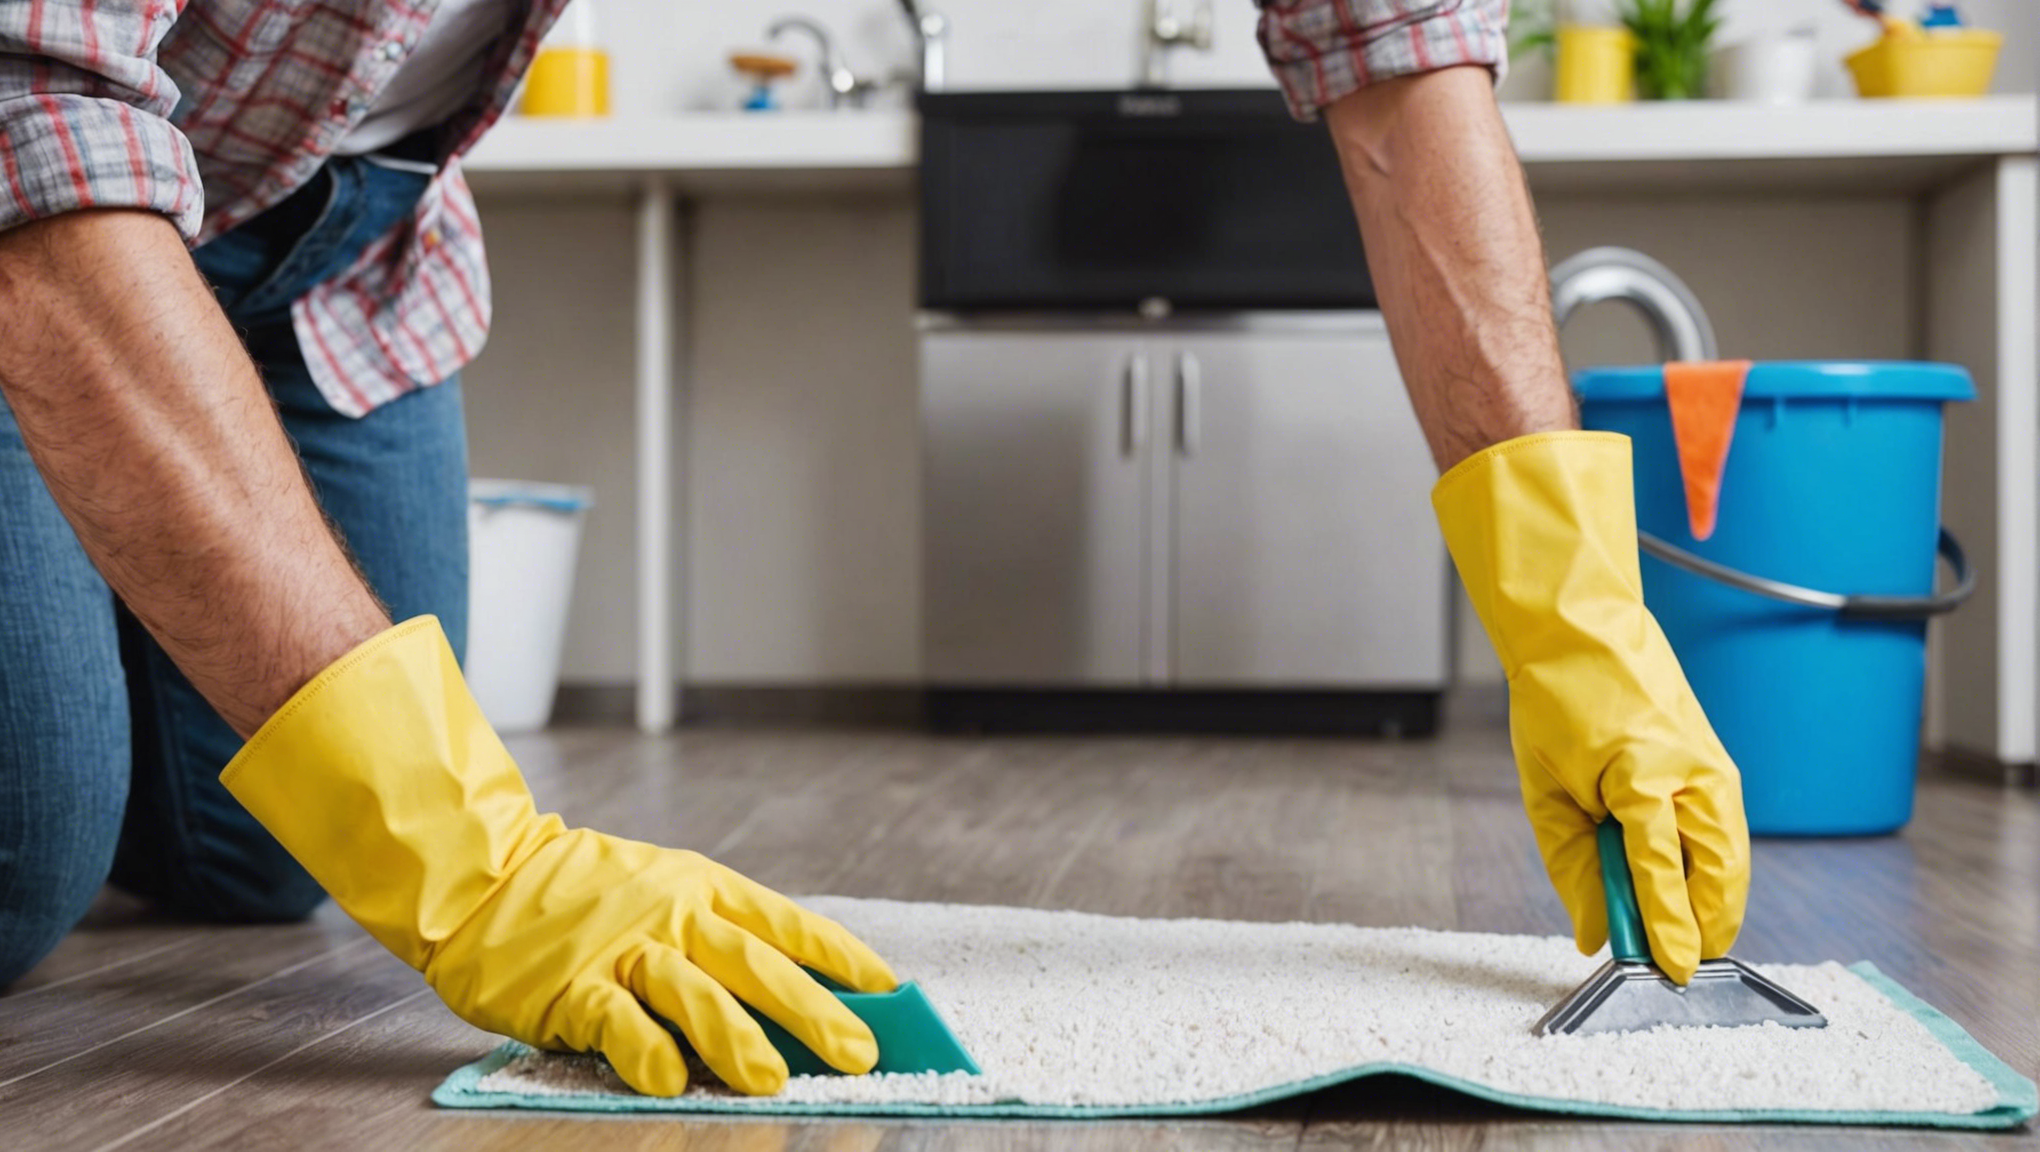 learn how to keep pests away with our top 10 spring cleaning tips! get expert advice on pest control and maintenance to create a pest-free environment.